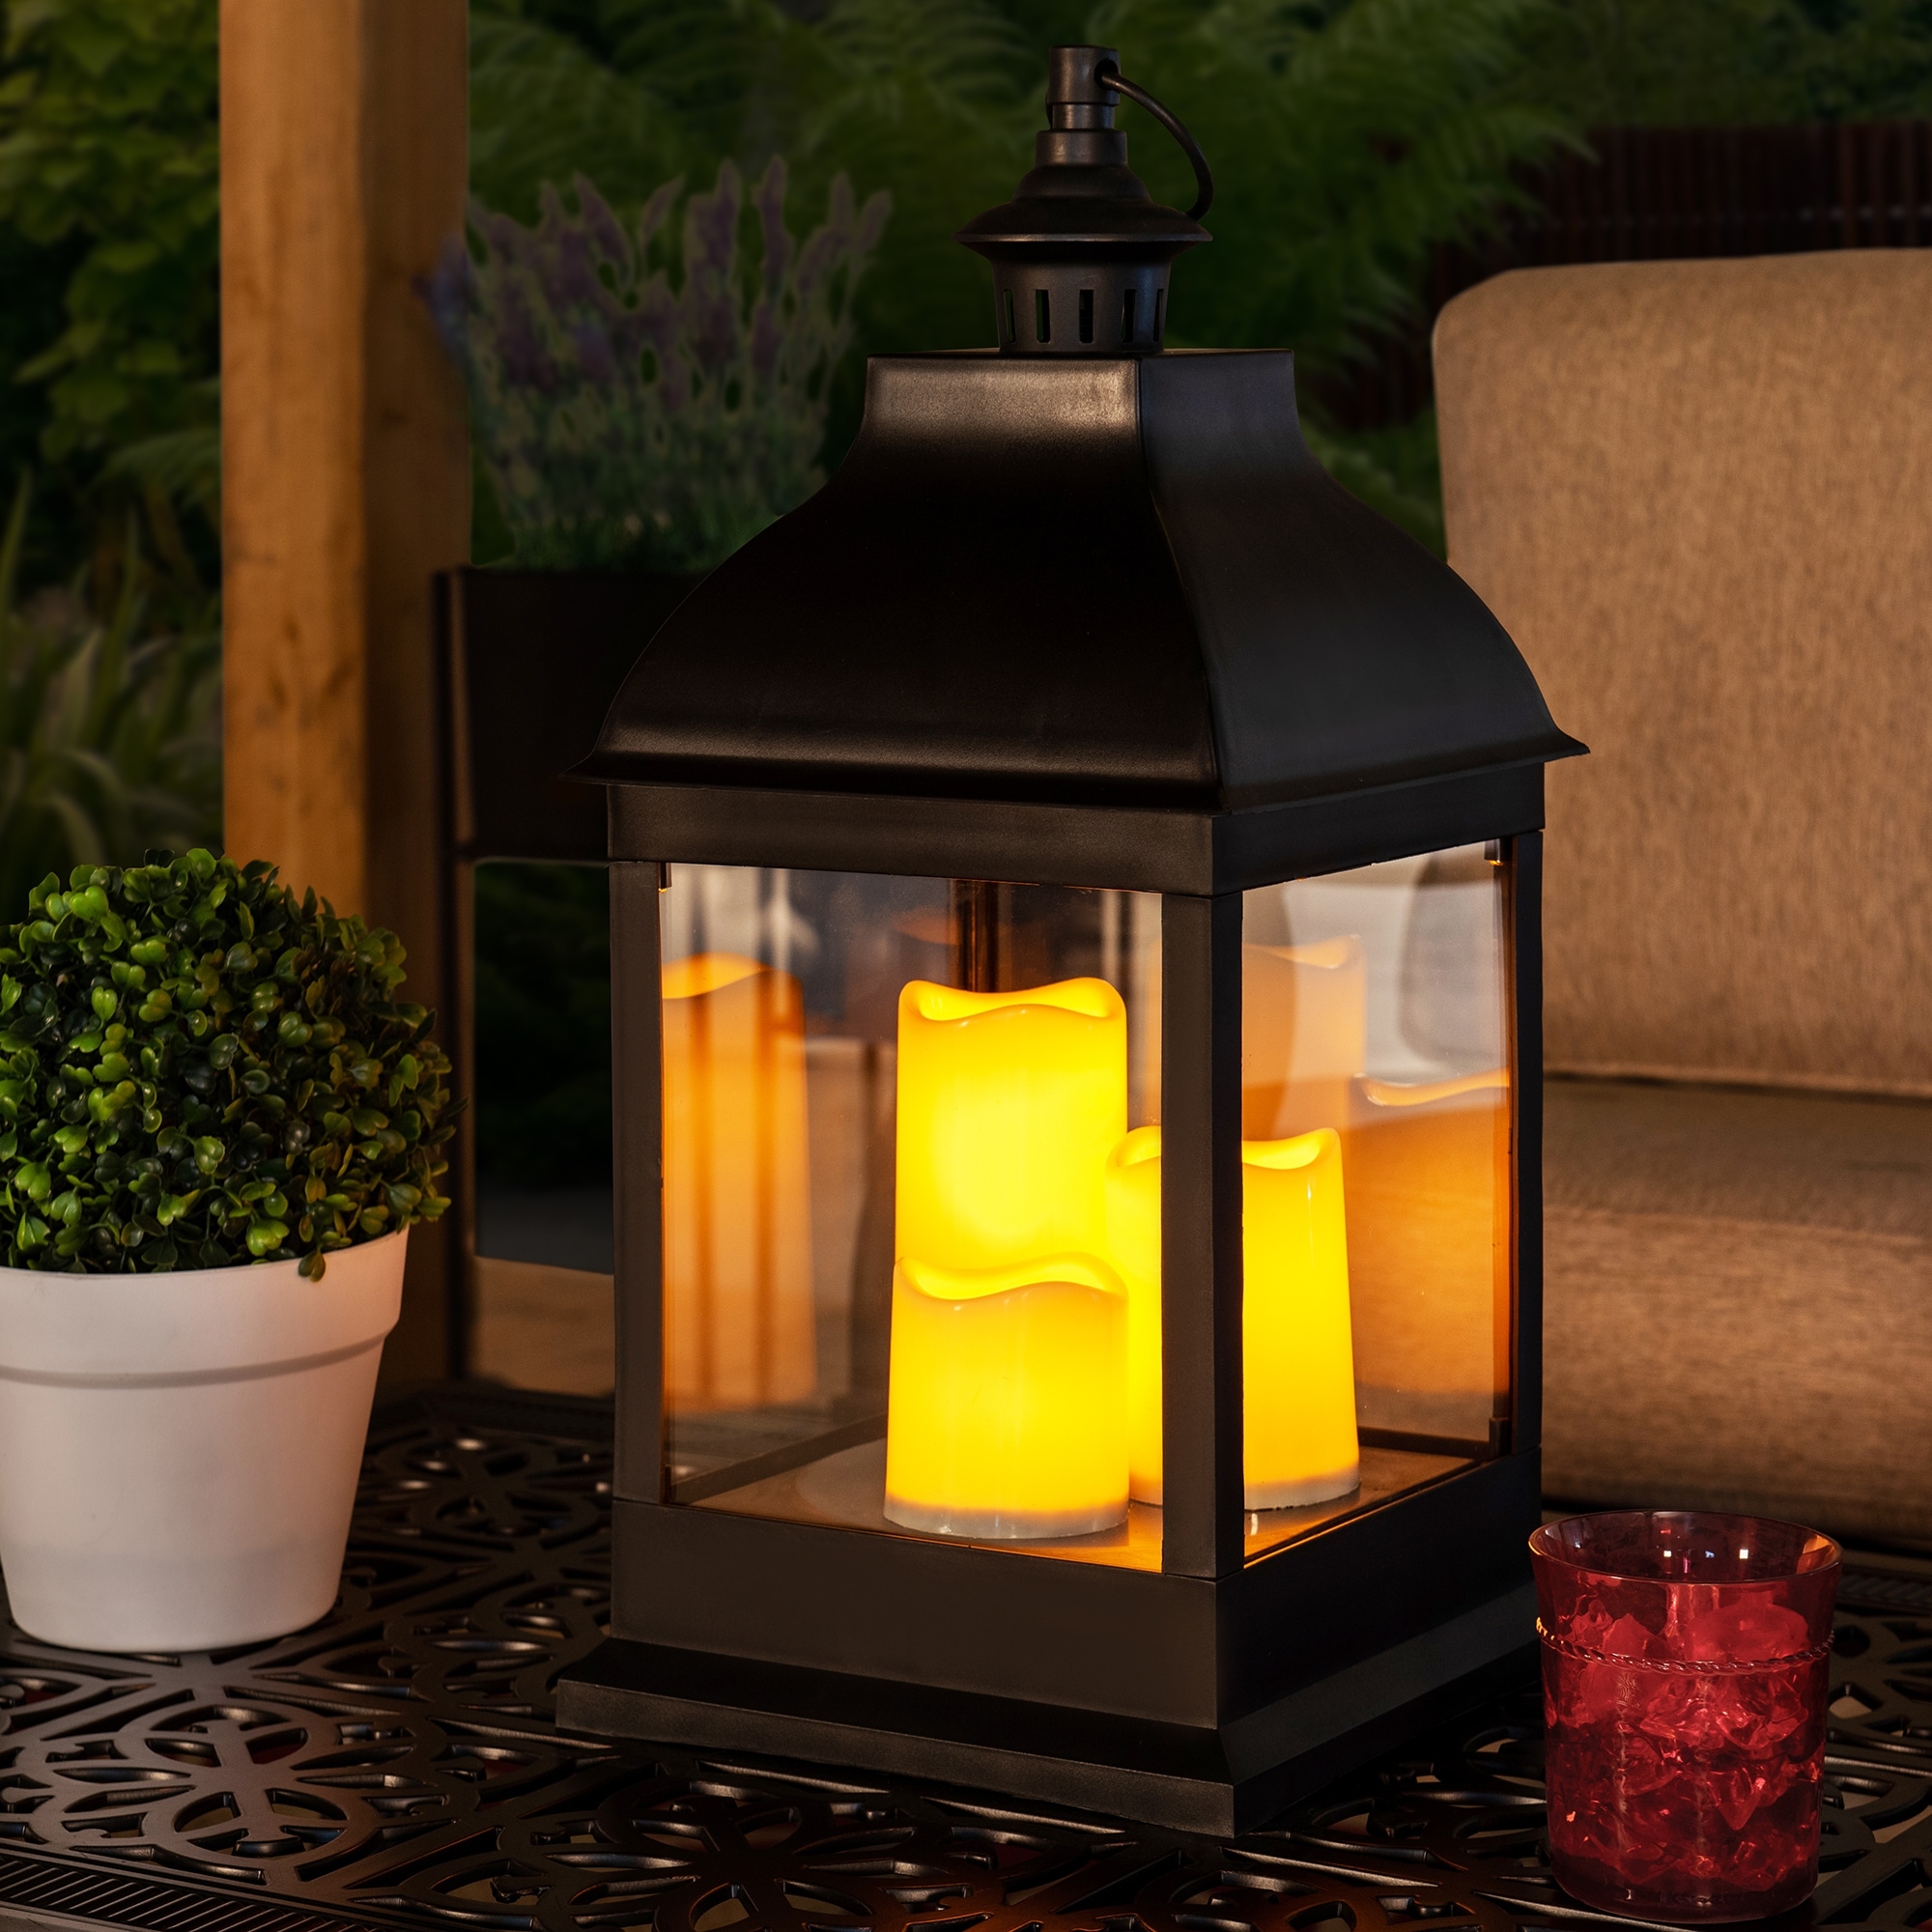 https://ak1.ostkcdn.com/images/products/is/images/direct/0de8f27916a0b179add9364bfb44a96a7d40d4c0/Sunjoy-20%22-LED-Battery-Powered-Lantern%2C-Outdoor-Patio-Decorative-Light%2C-Waterproof-Hanging-Lantern-with-3-Flameless-Candles.jpg